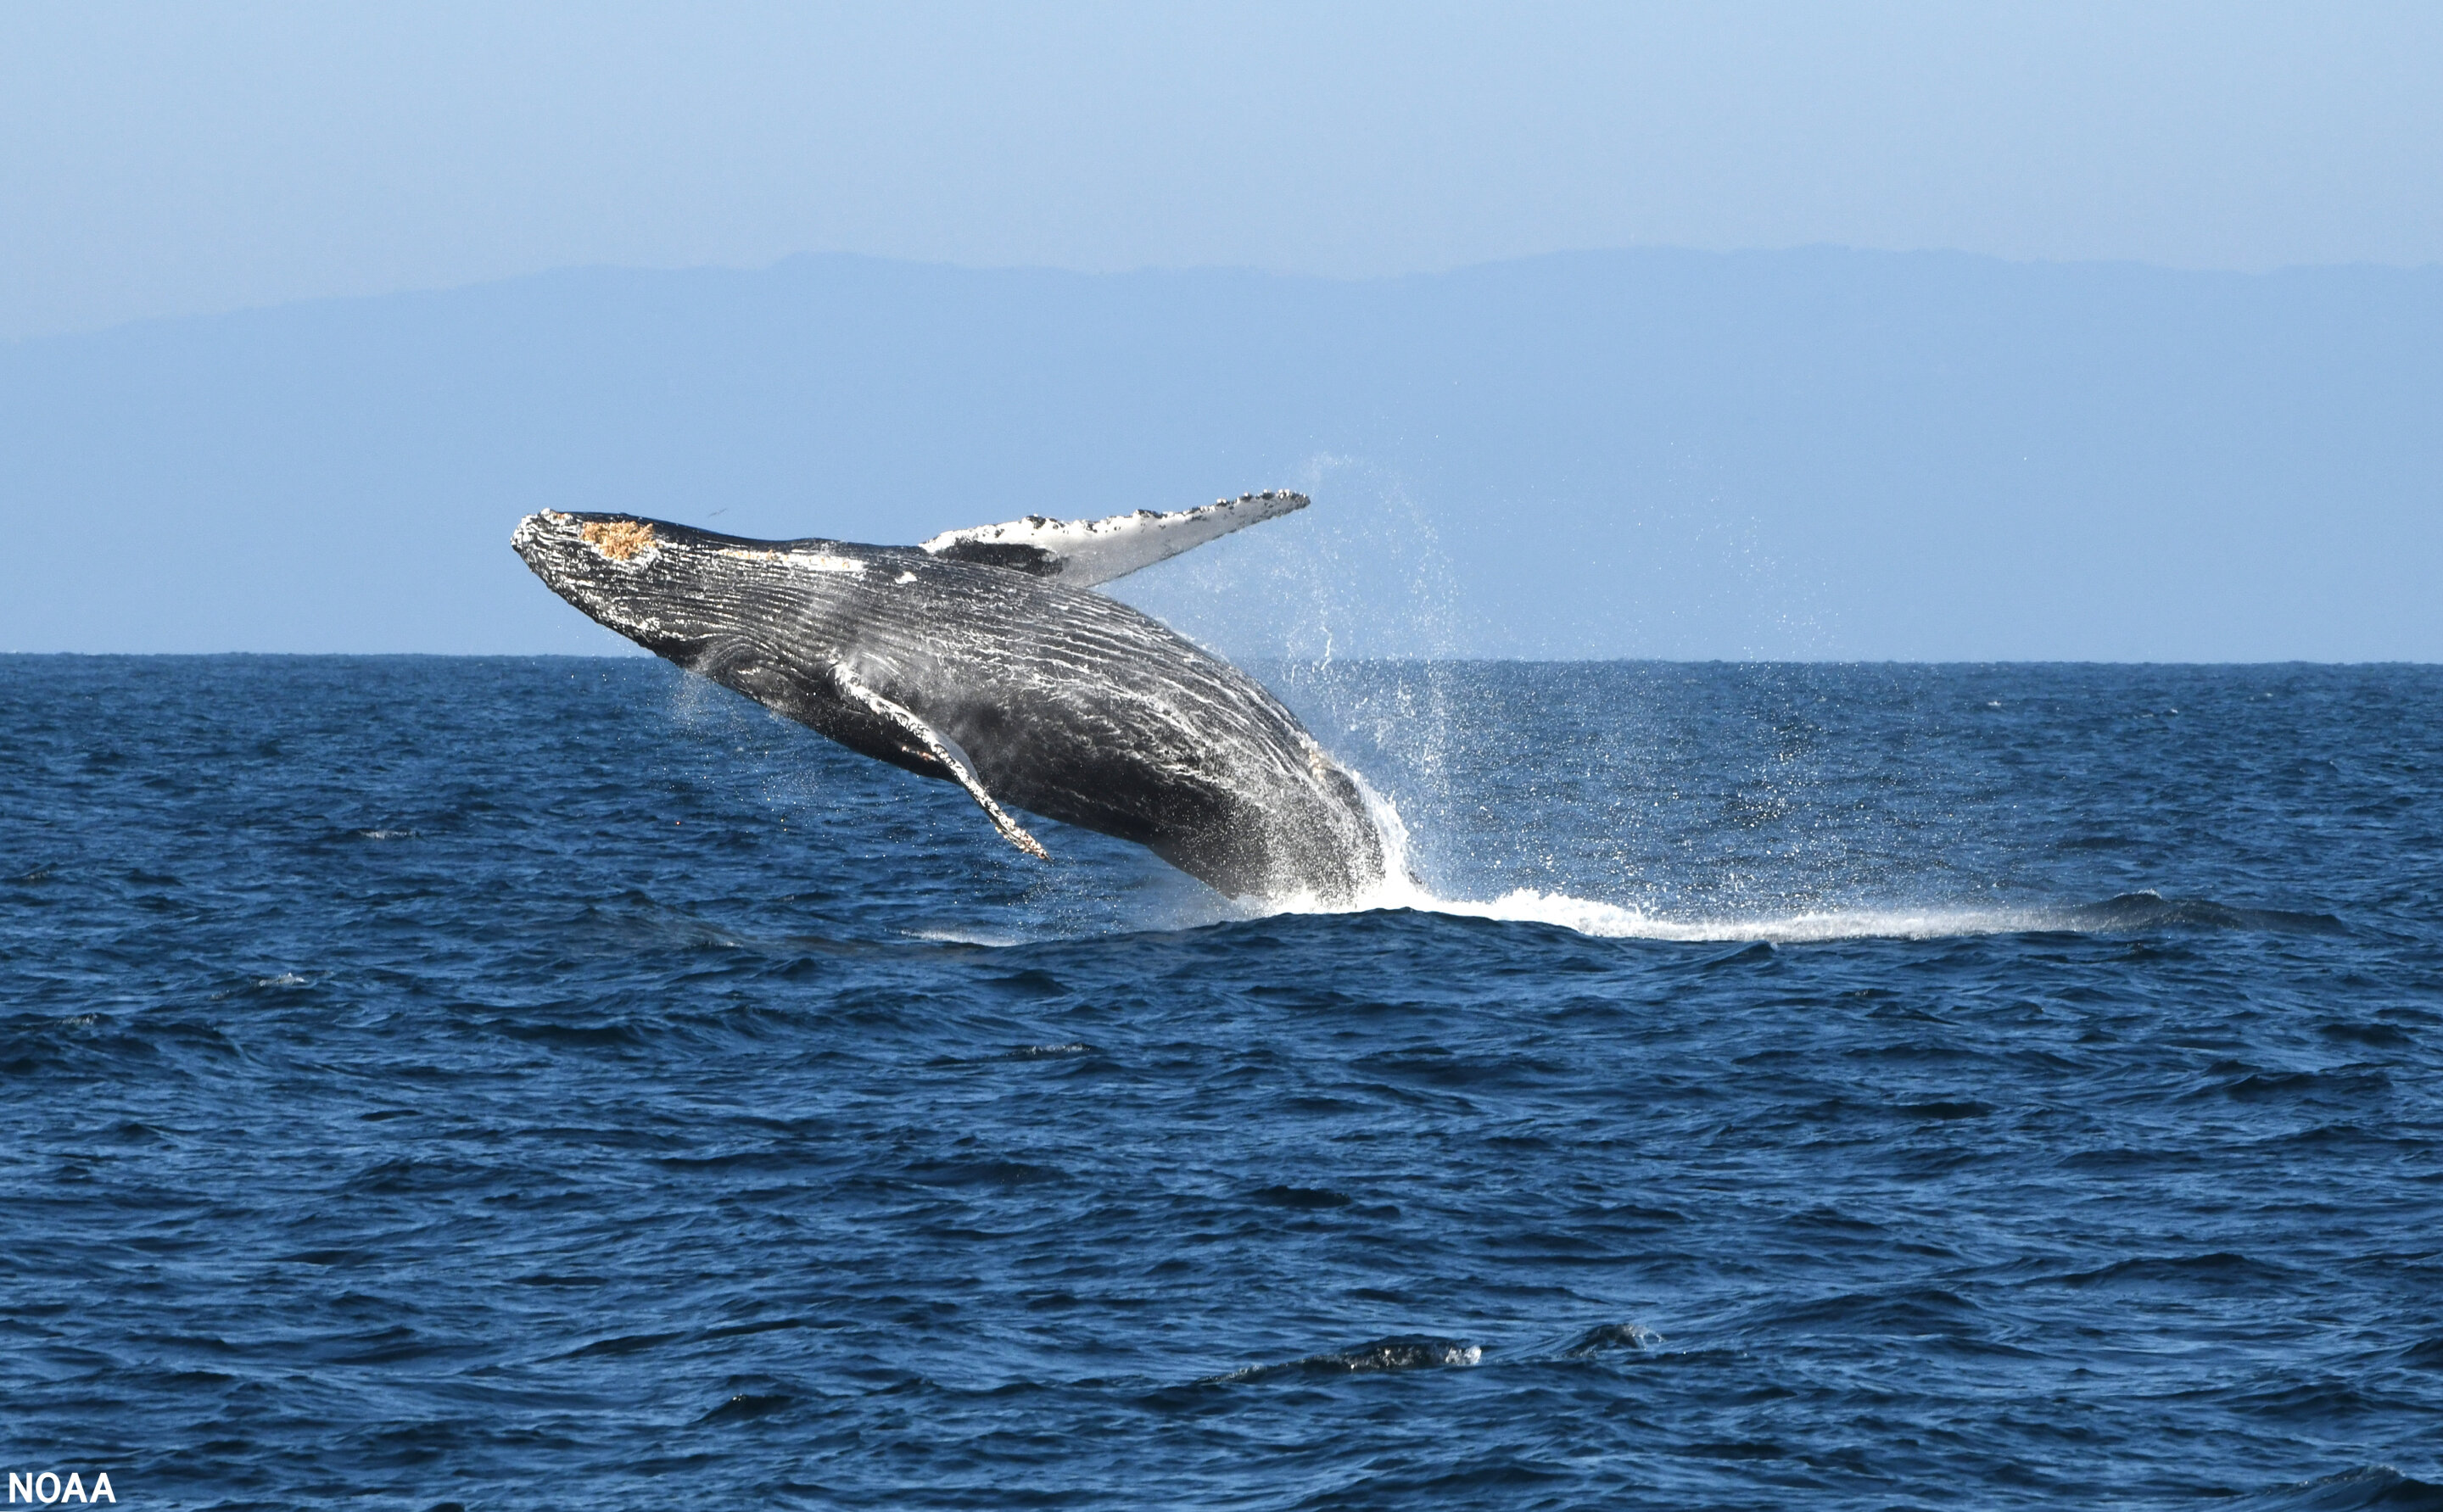 #New protections for endangered whales along the California coast adopted